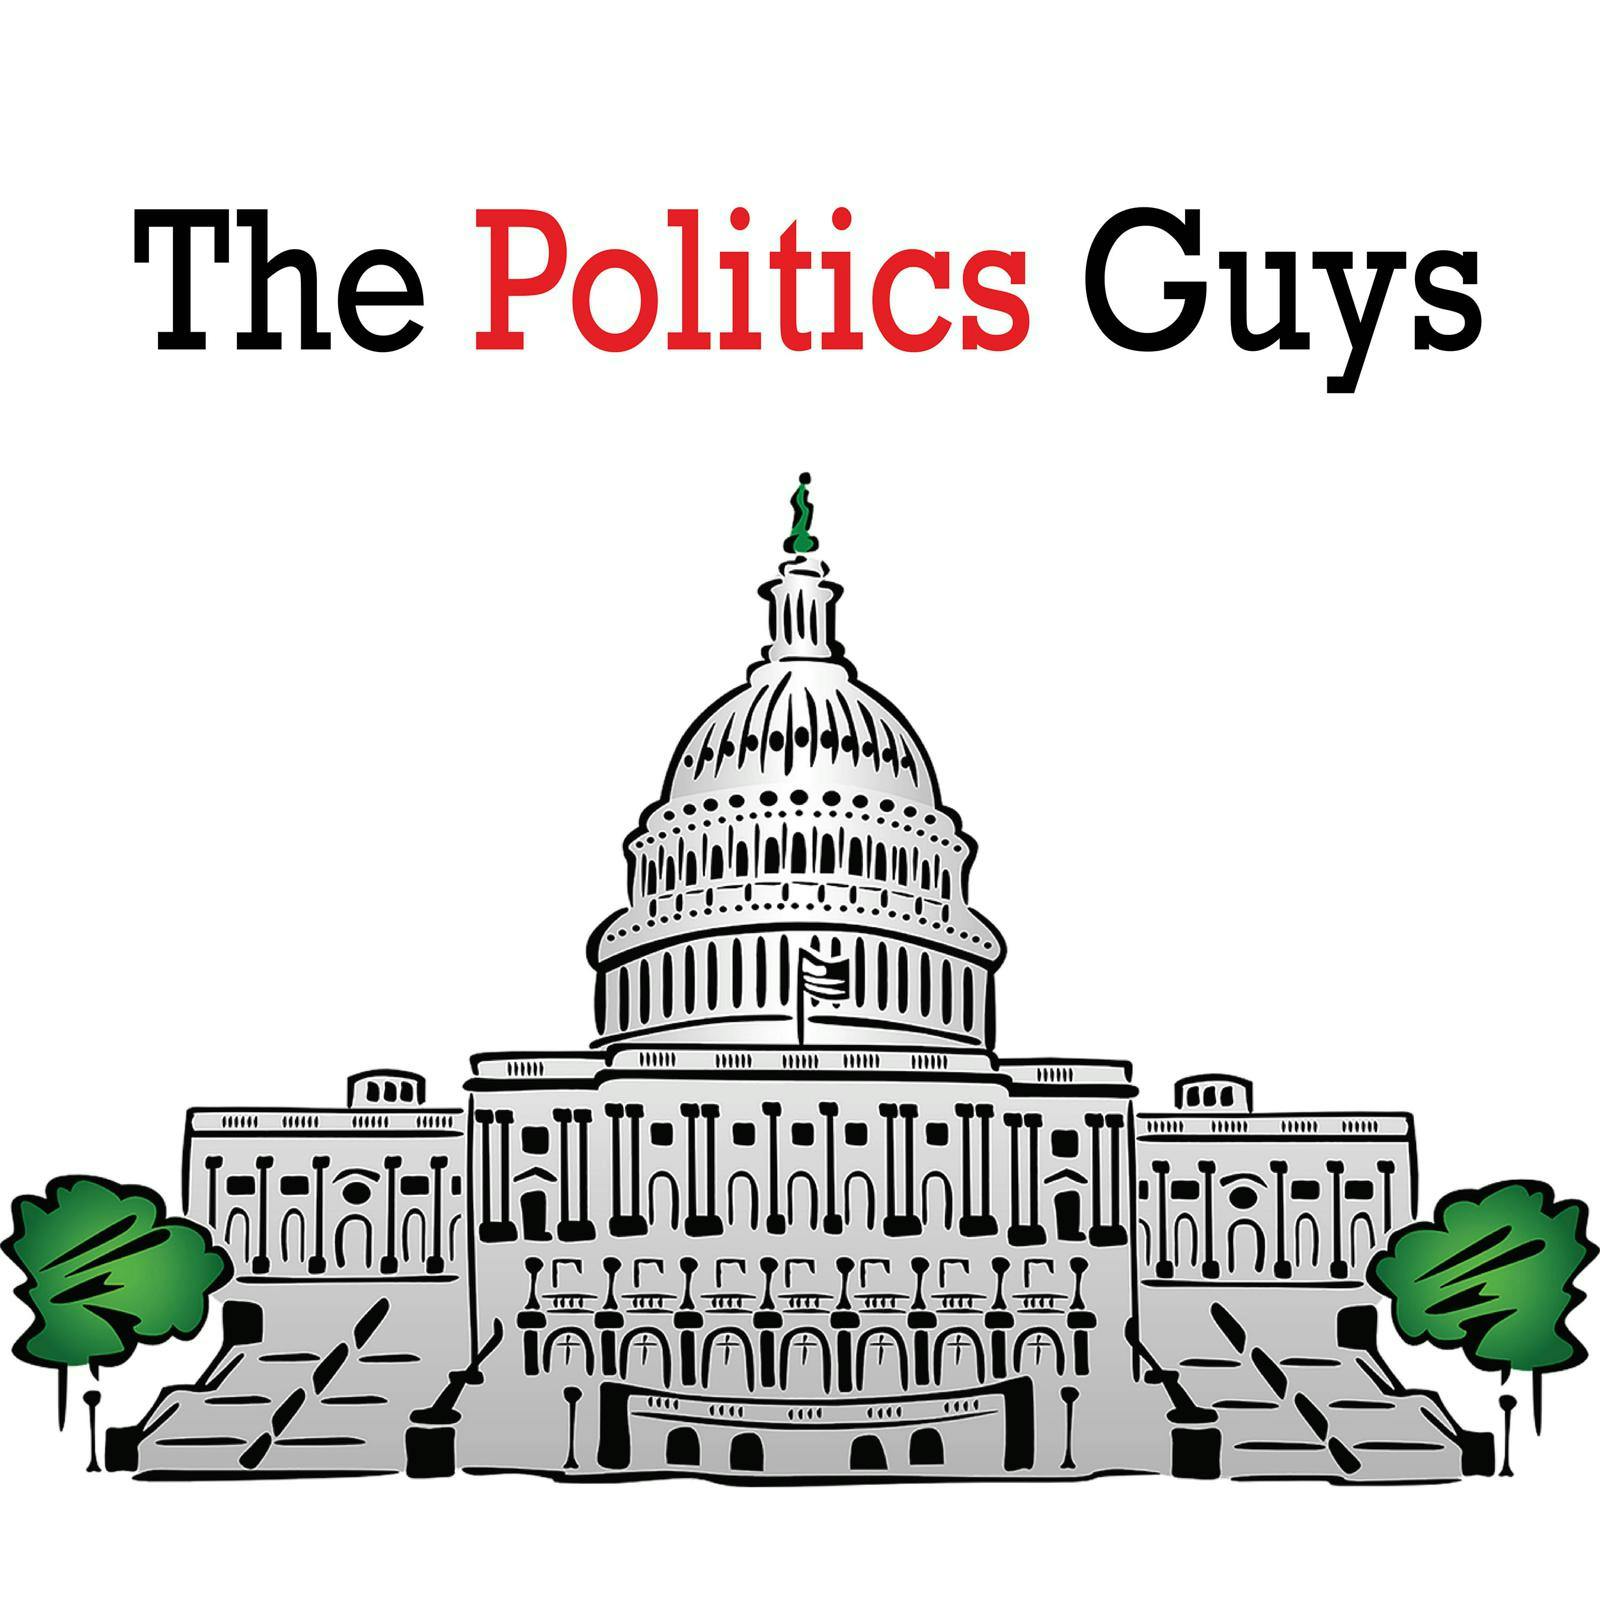 Ask The Politics Guys: Is the U.S. A Flawed Democracy?